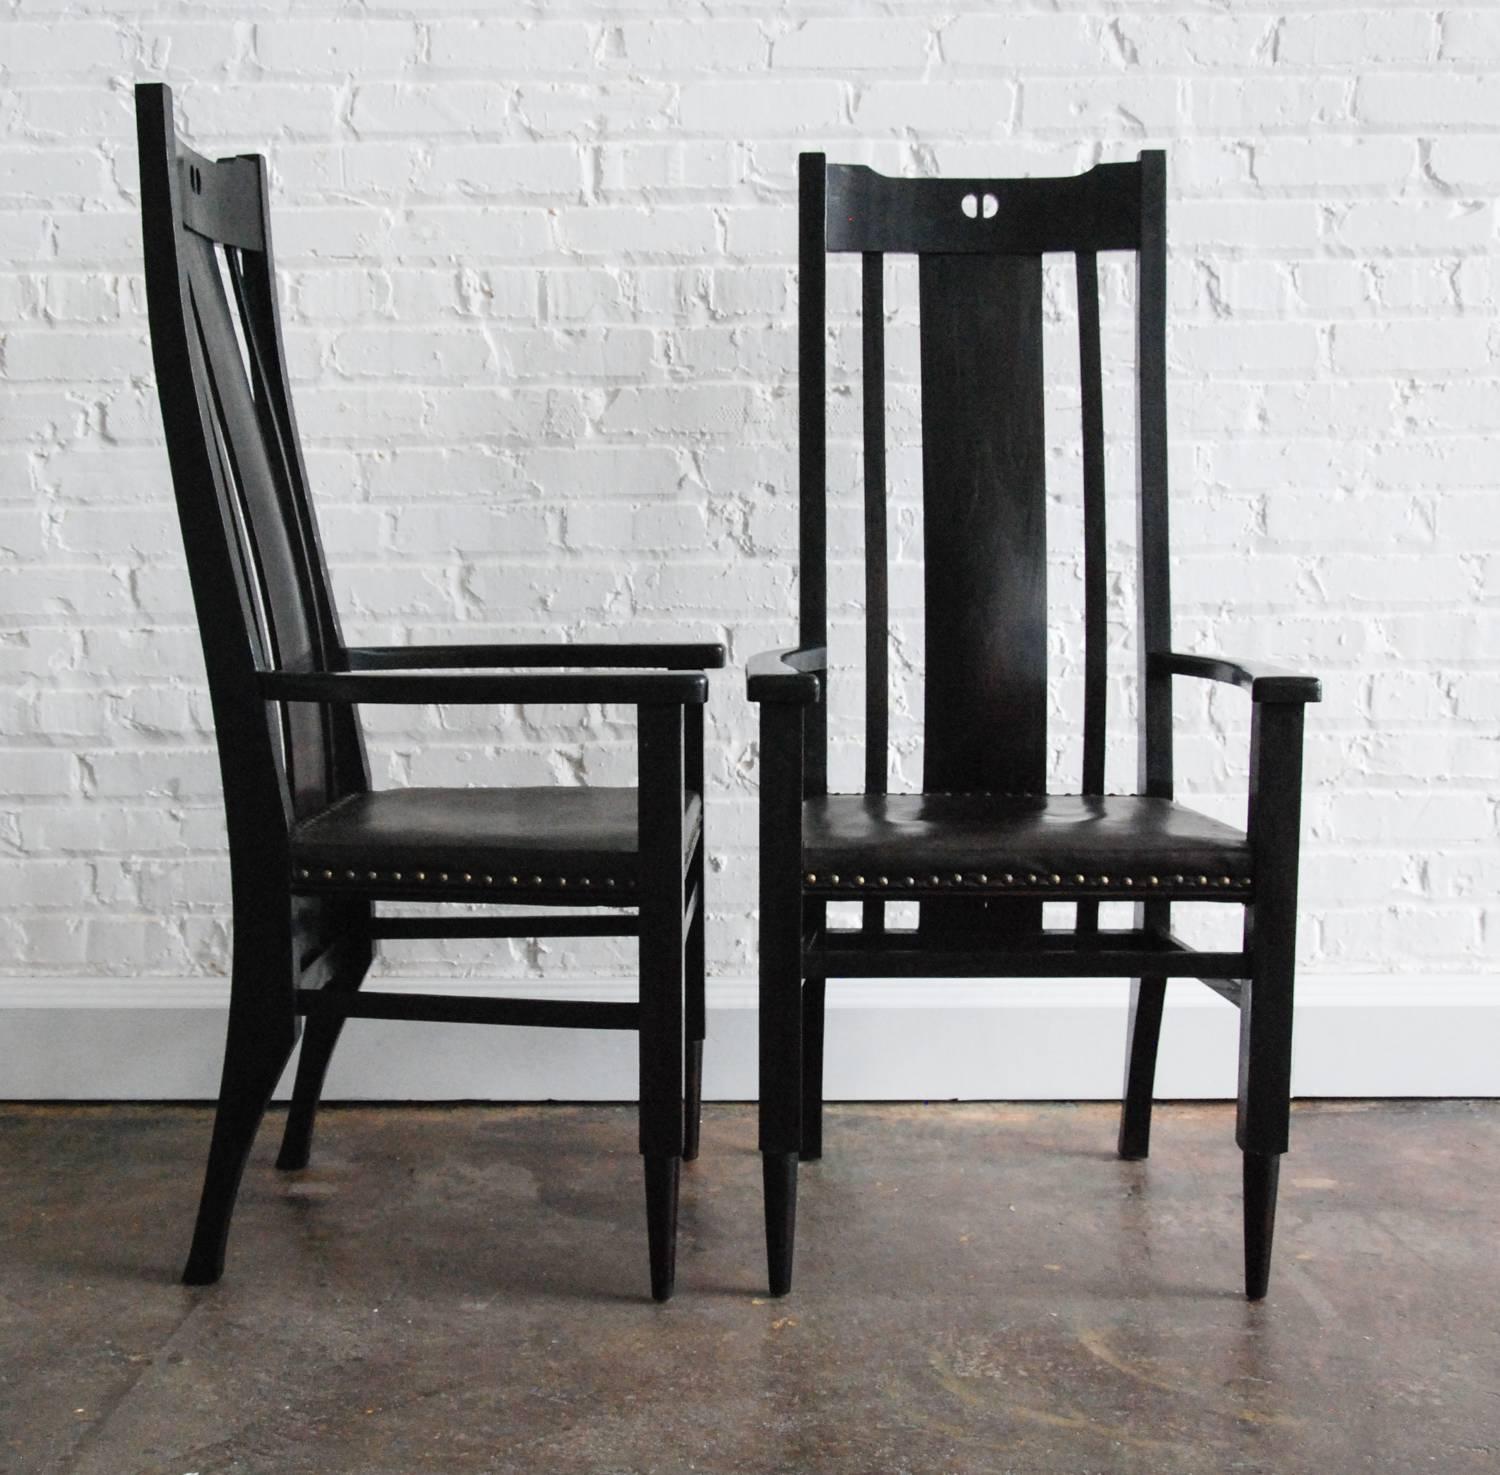 A stunning pair of ebonized oak and leather highback armchairs inspired by the designs of Gustave Stickley, Charles Limbert and Charles Rennie Mackintosh in the Arts and Crafts style updated to the 80's art furniture movement.  The chairs are